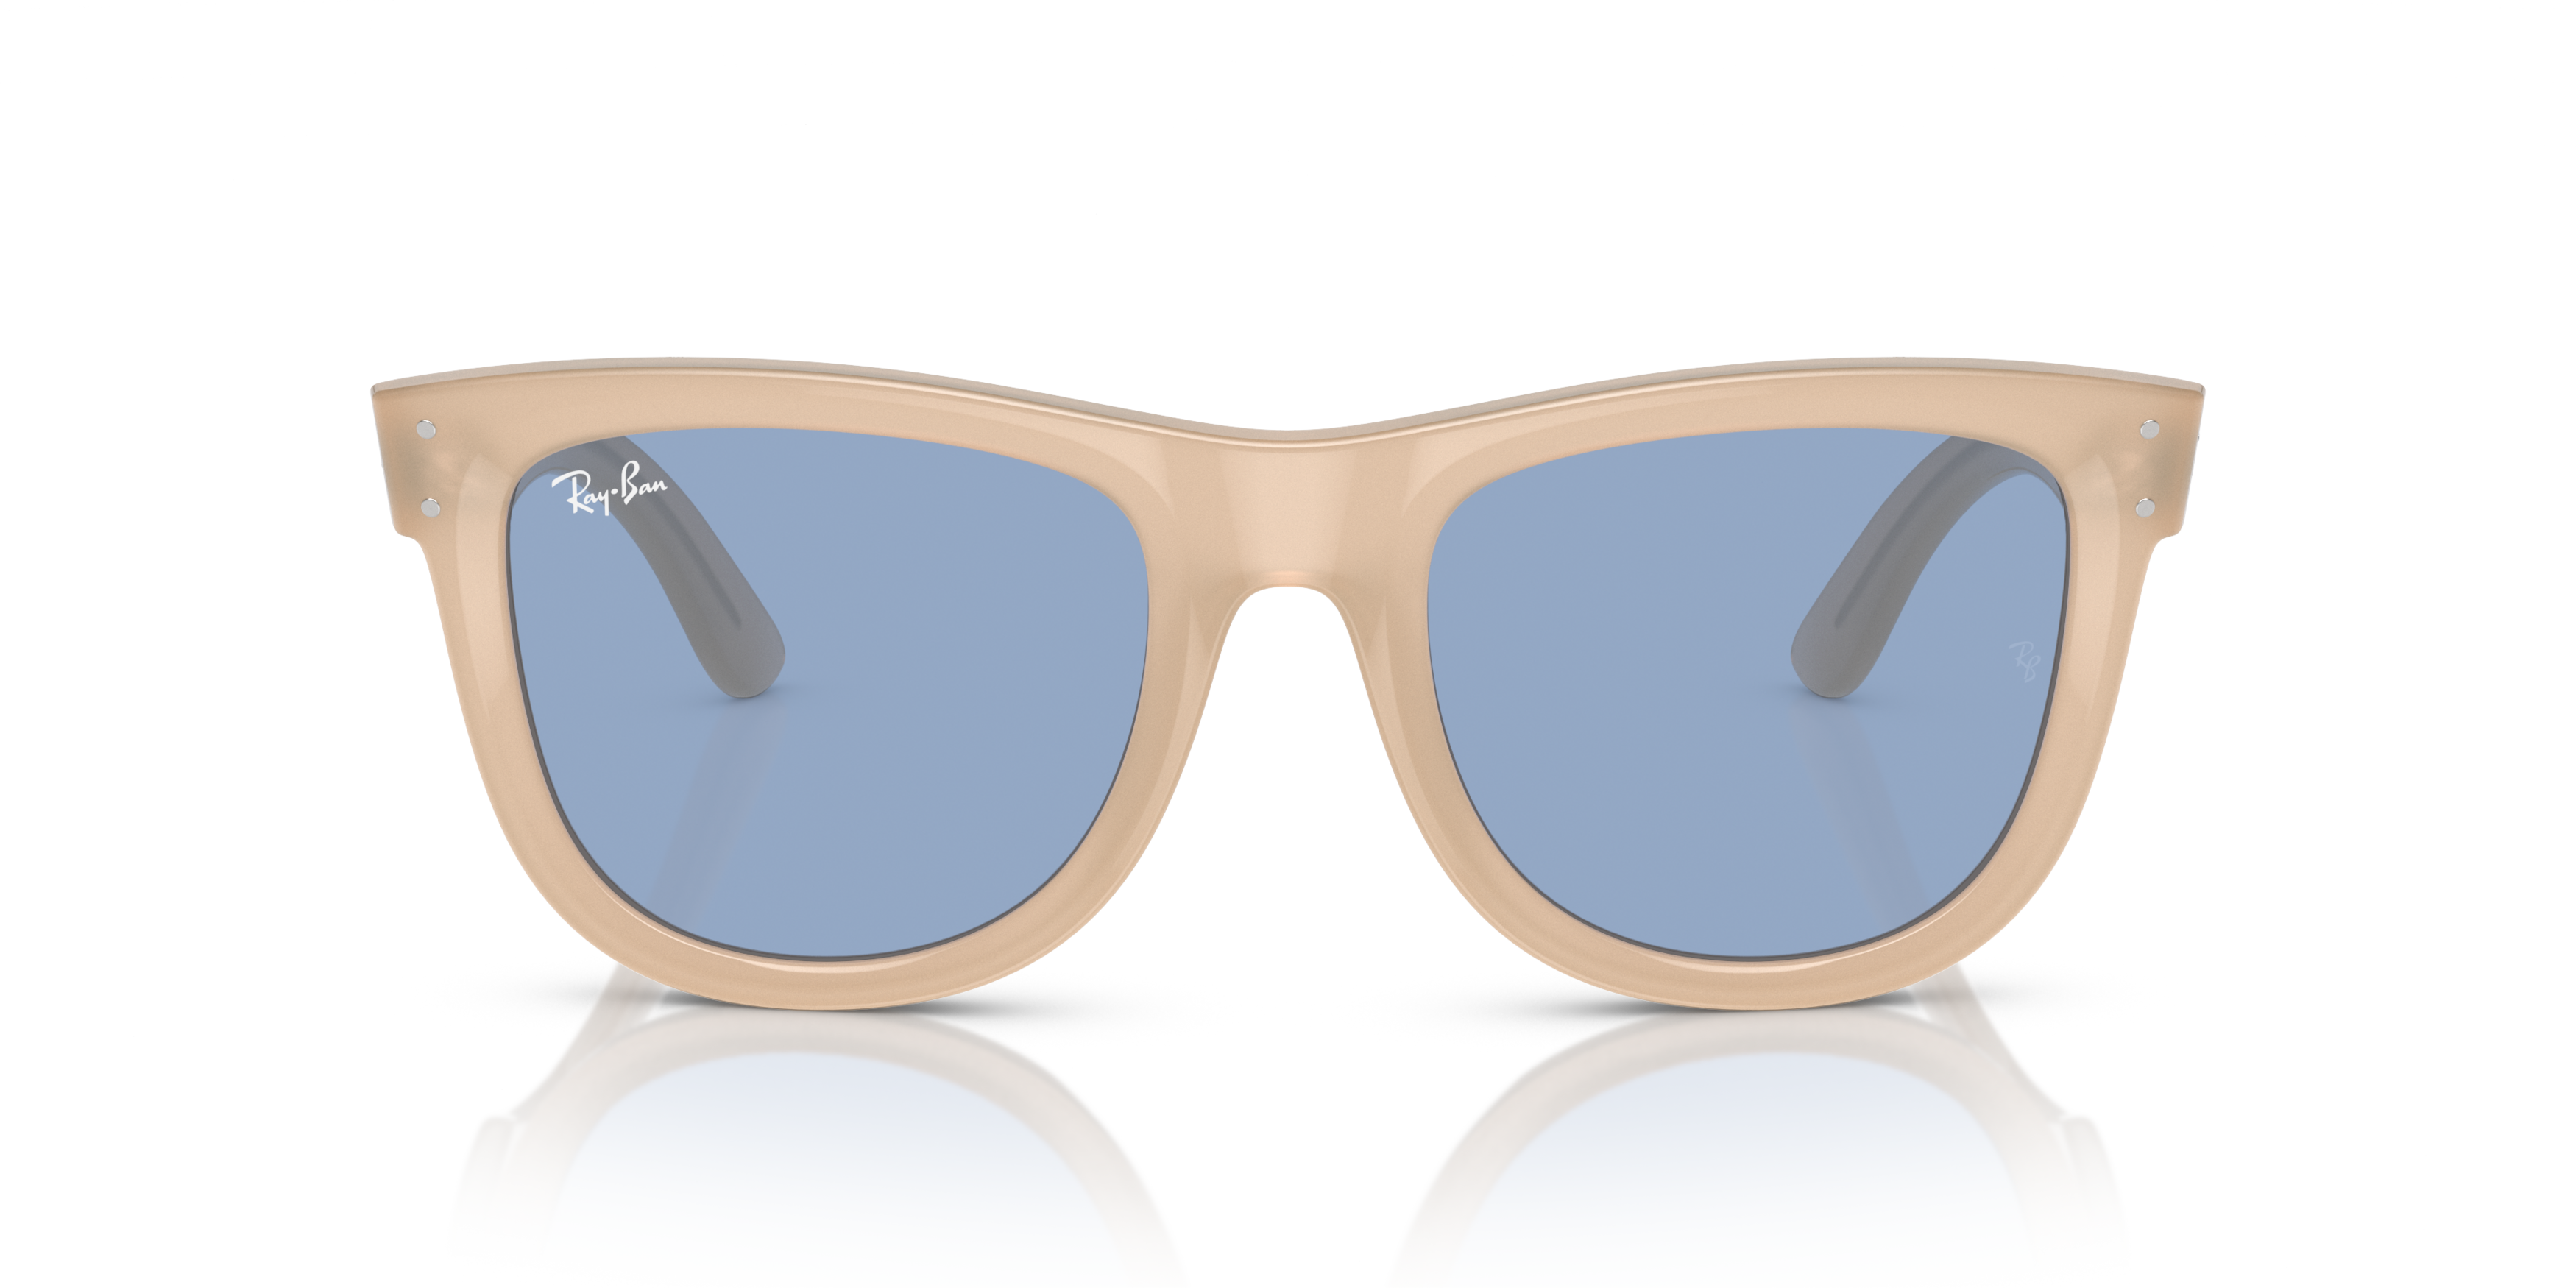 [products.image.front] Ray-Ban RBR0502S Wayfarer Reverse RBR0502S 678072